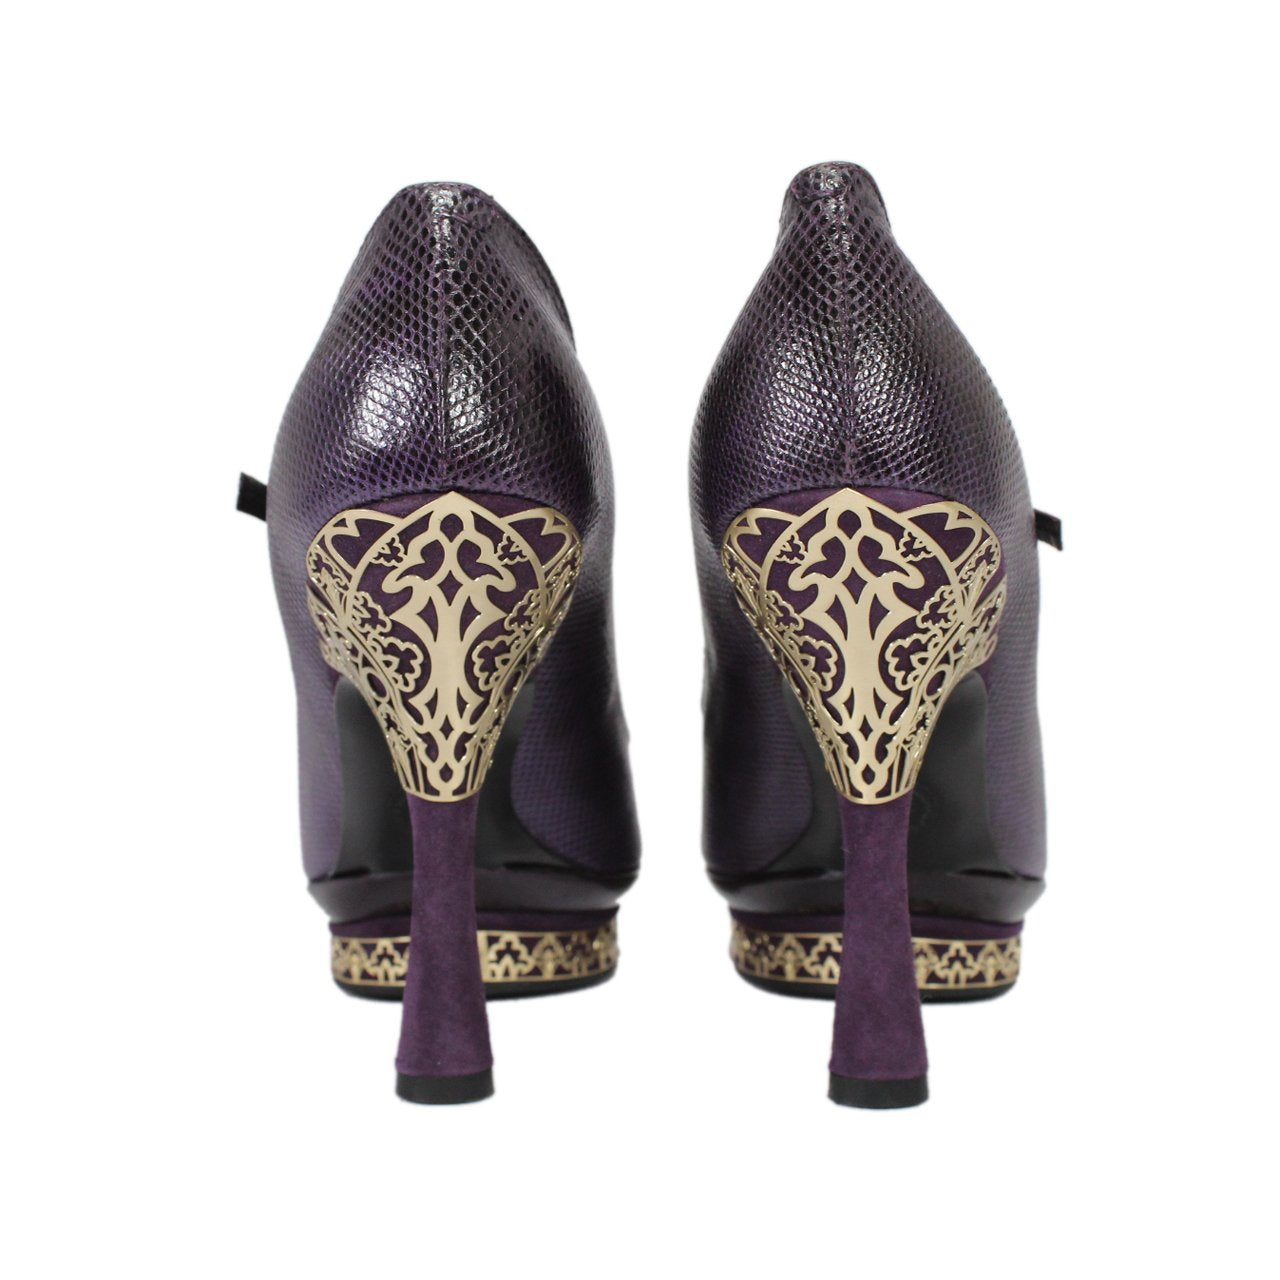 Bally Pattys Purple Pointed-Toe Flare Heel Pumps With T-Strap